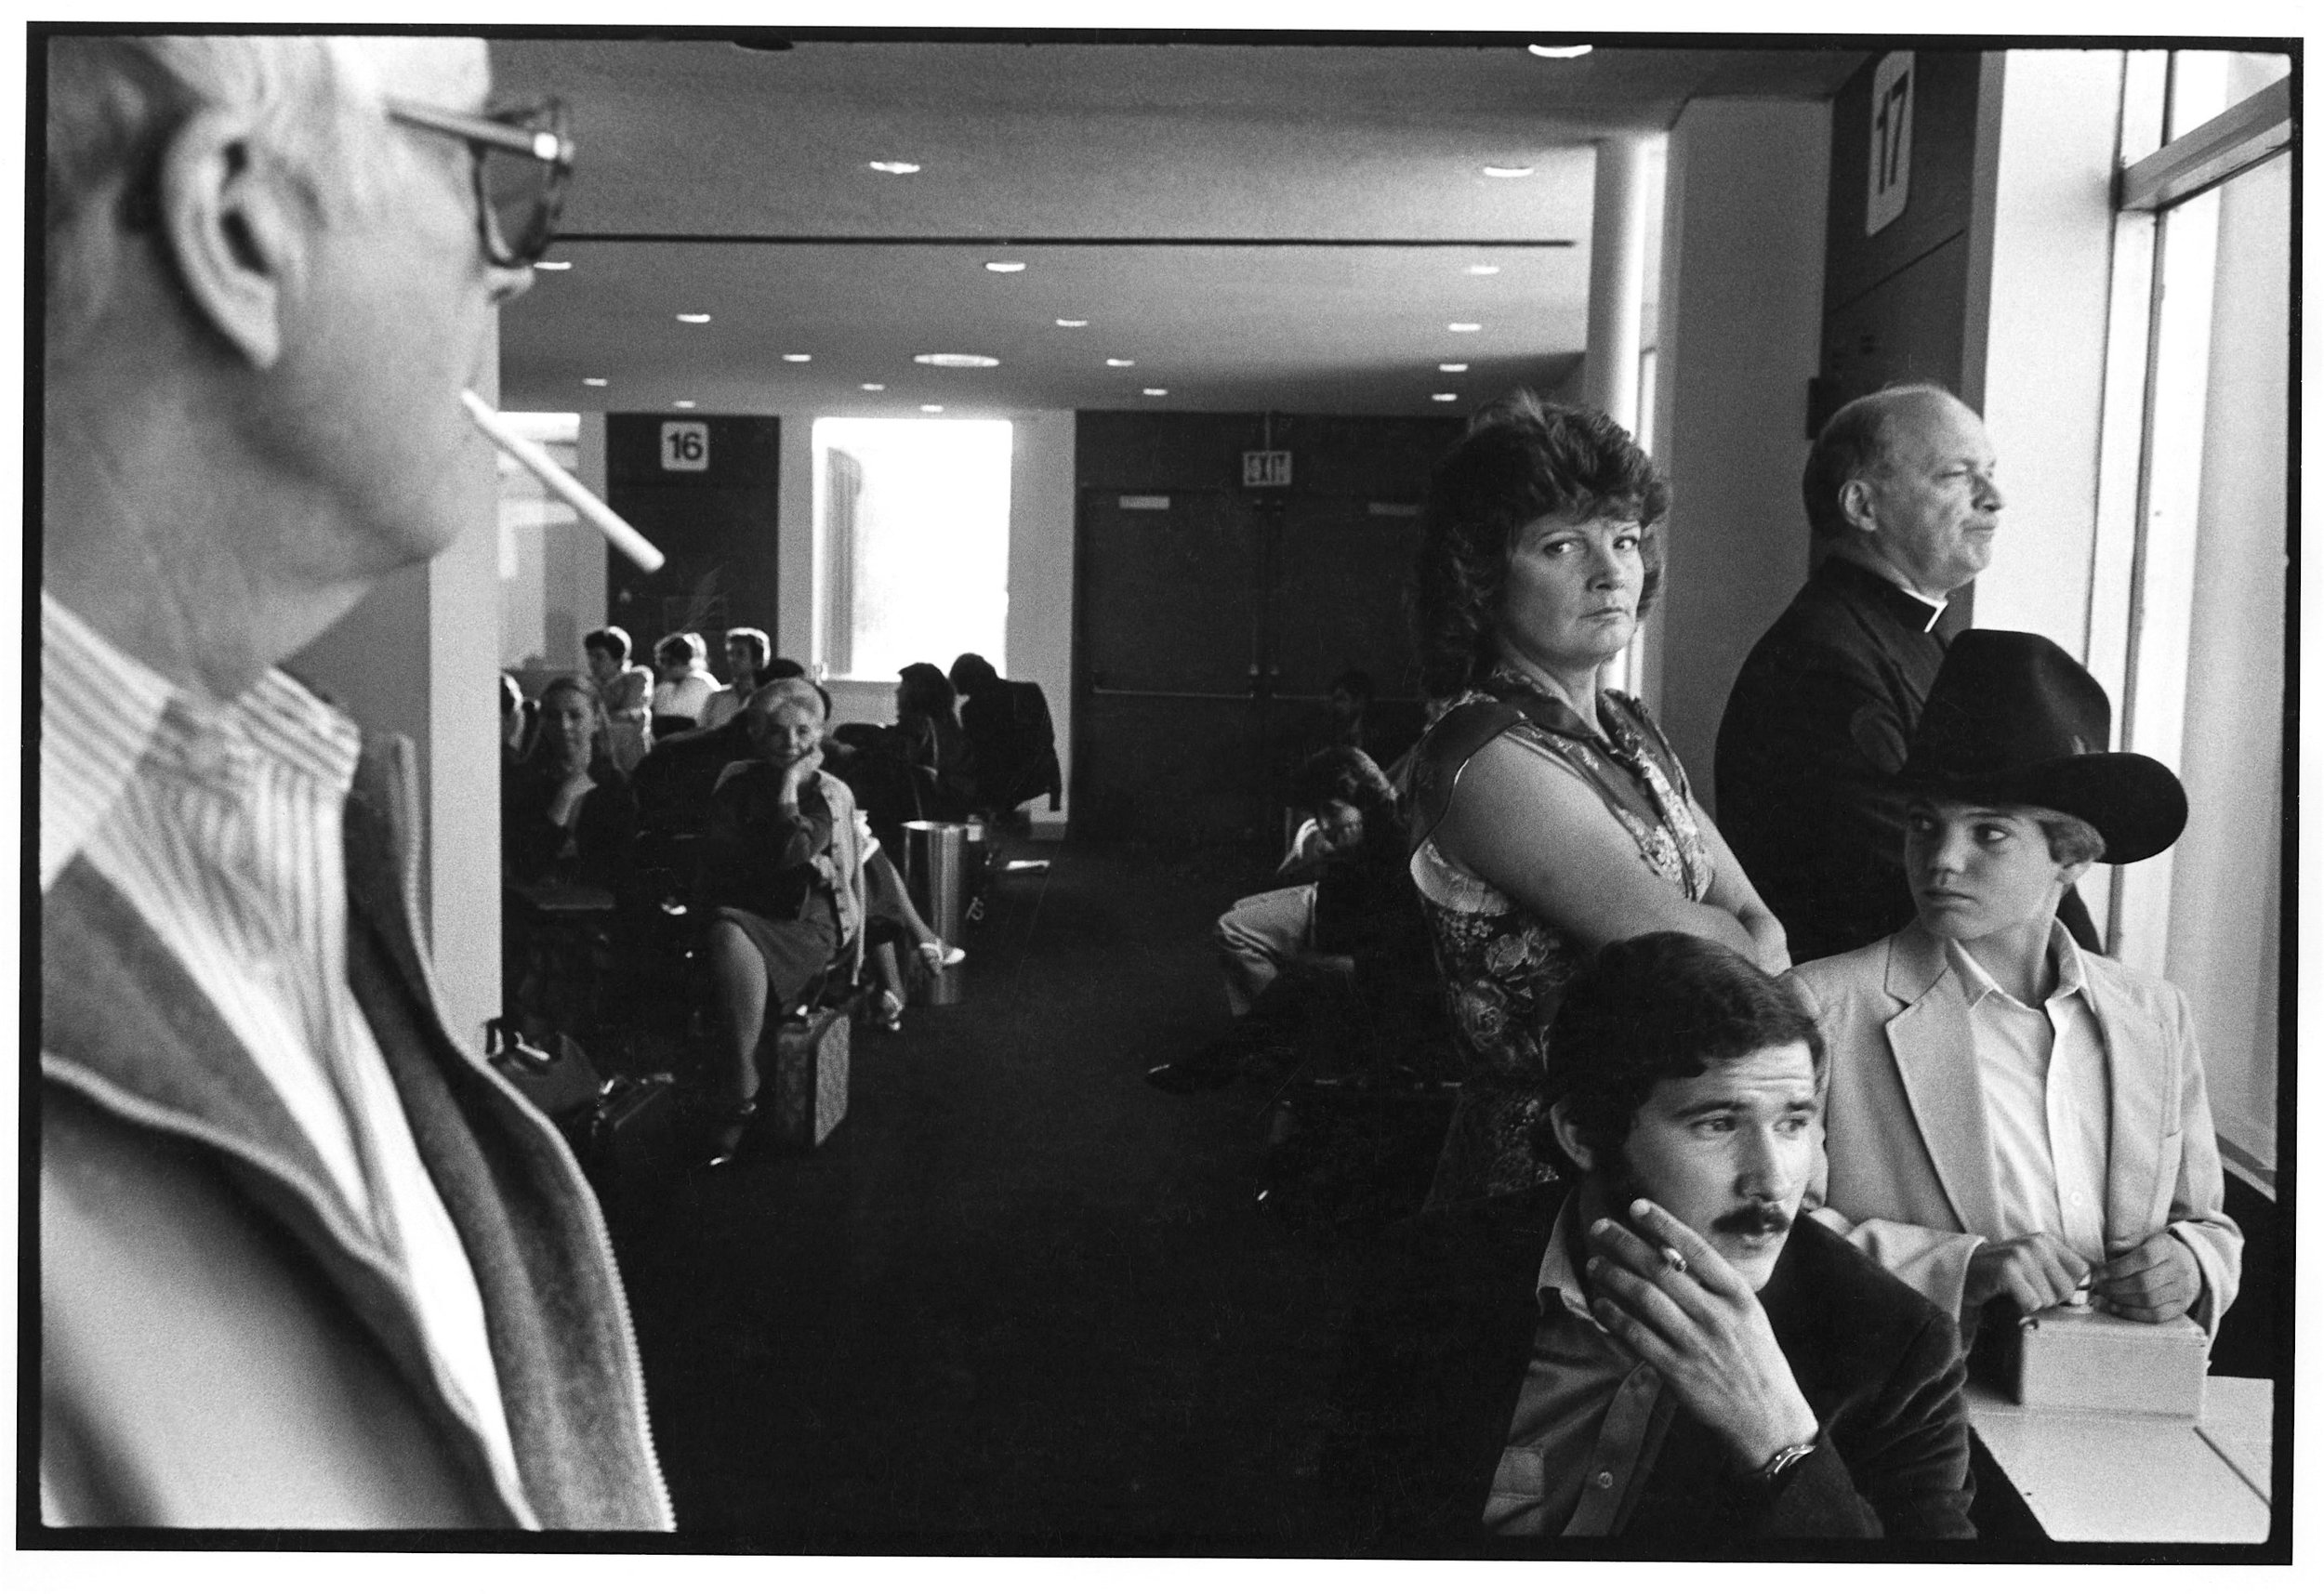 la guardia airport departure lounge, nyc, early 1980’s